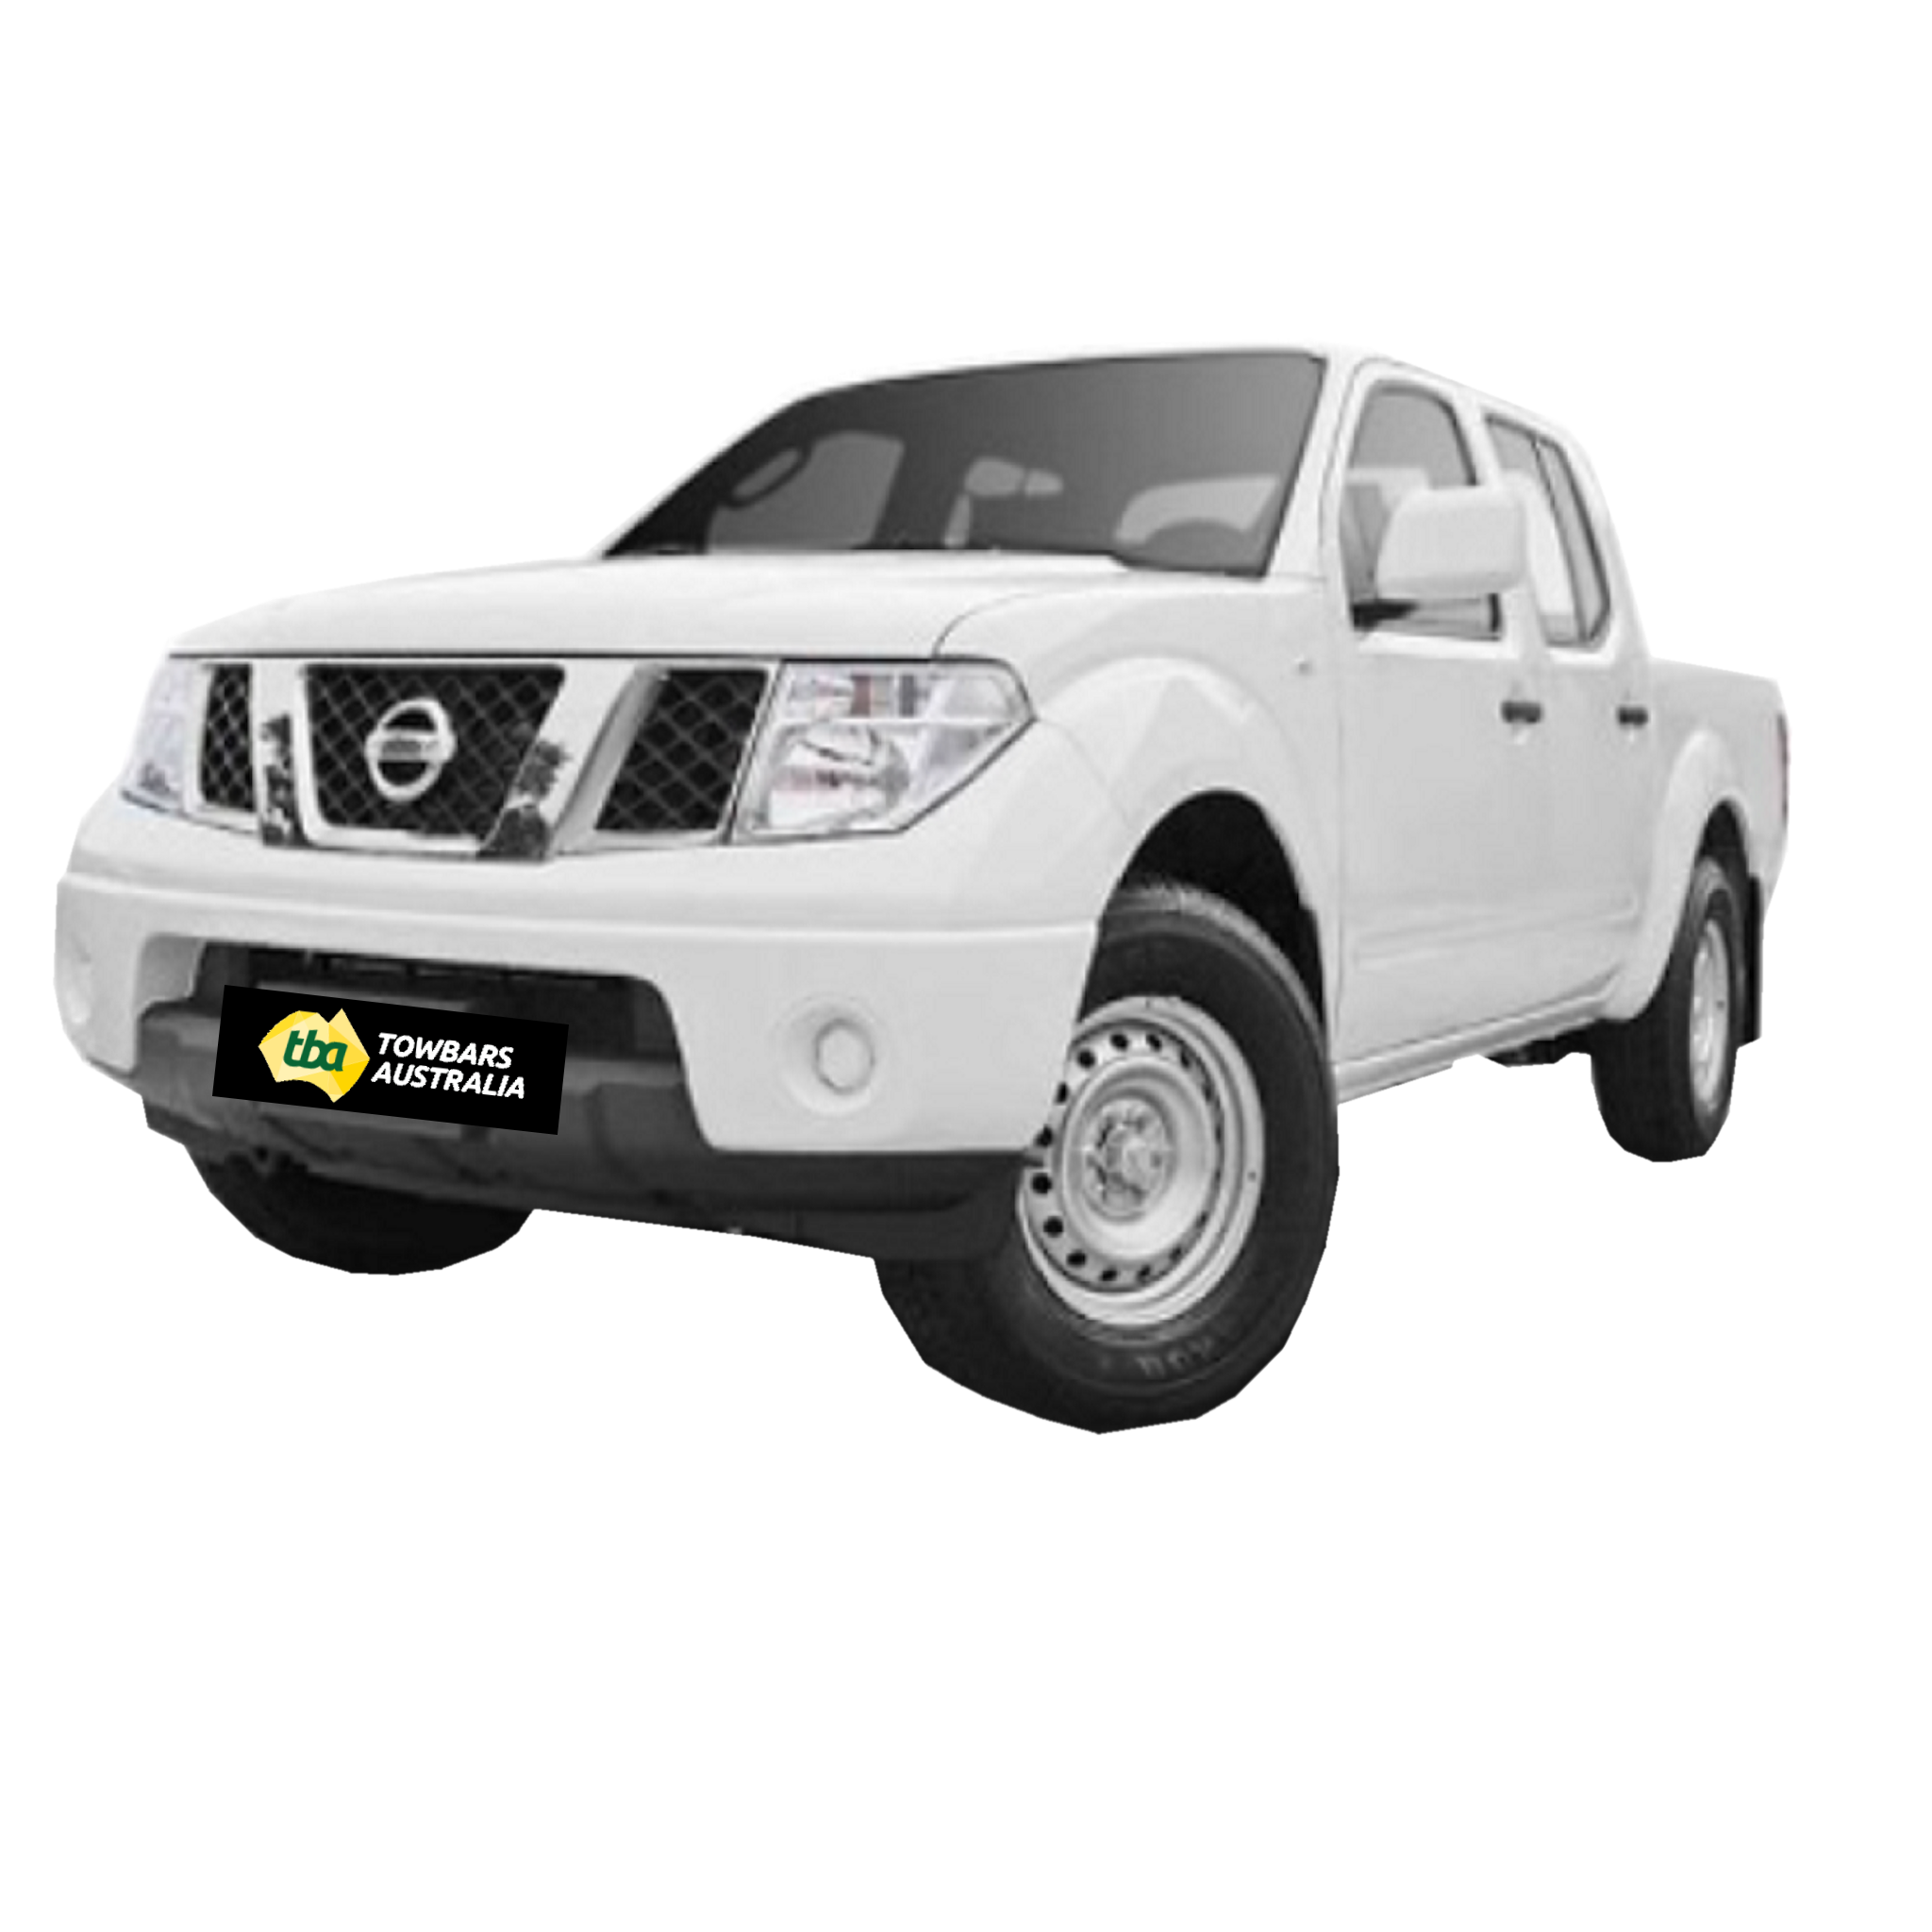 Nissan Navara D40 2.5L 4 Cylinder Ute 2007 - 2015 (Factory Turbo Has Pressed S/S Dump Pipe) - Exhaust System